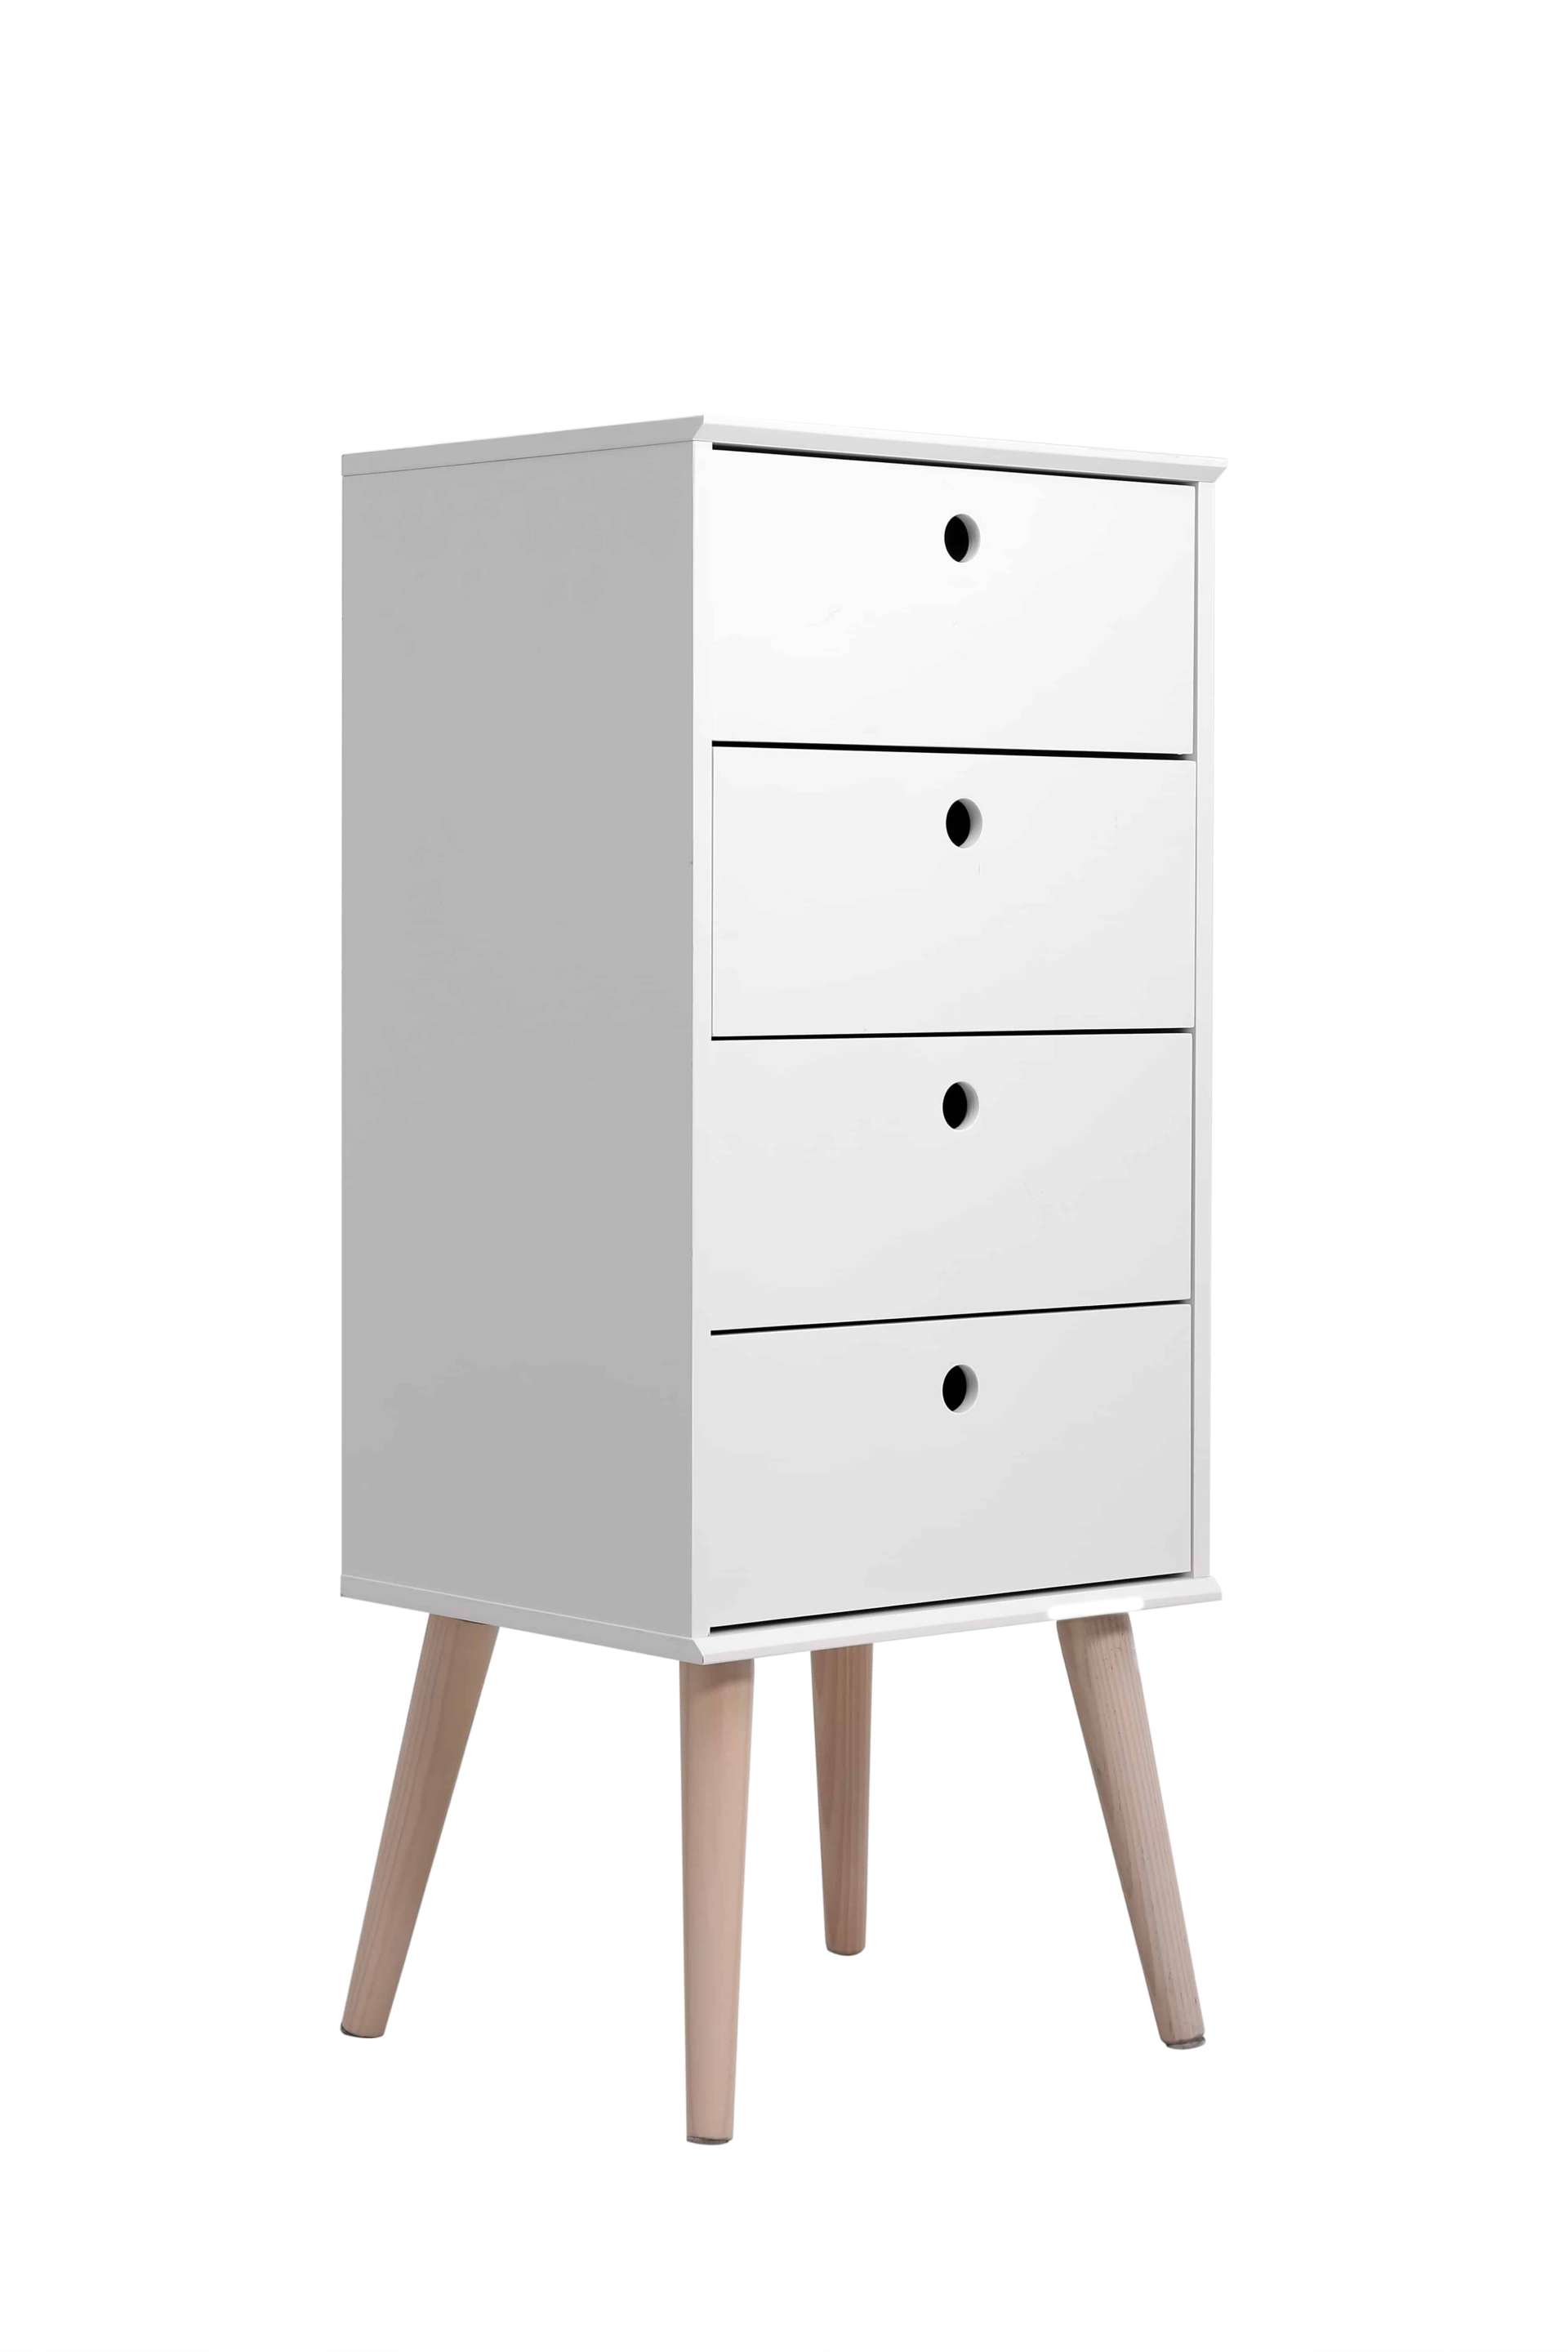 picture of medium size cabinet